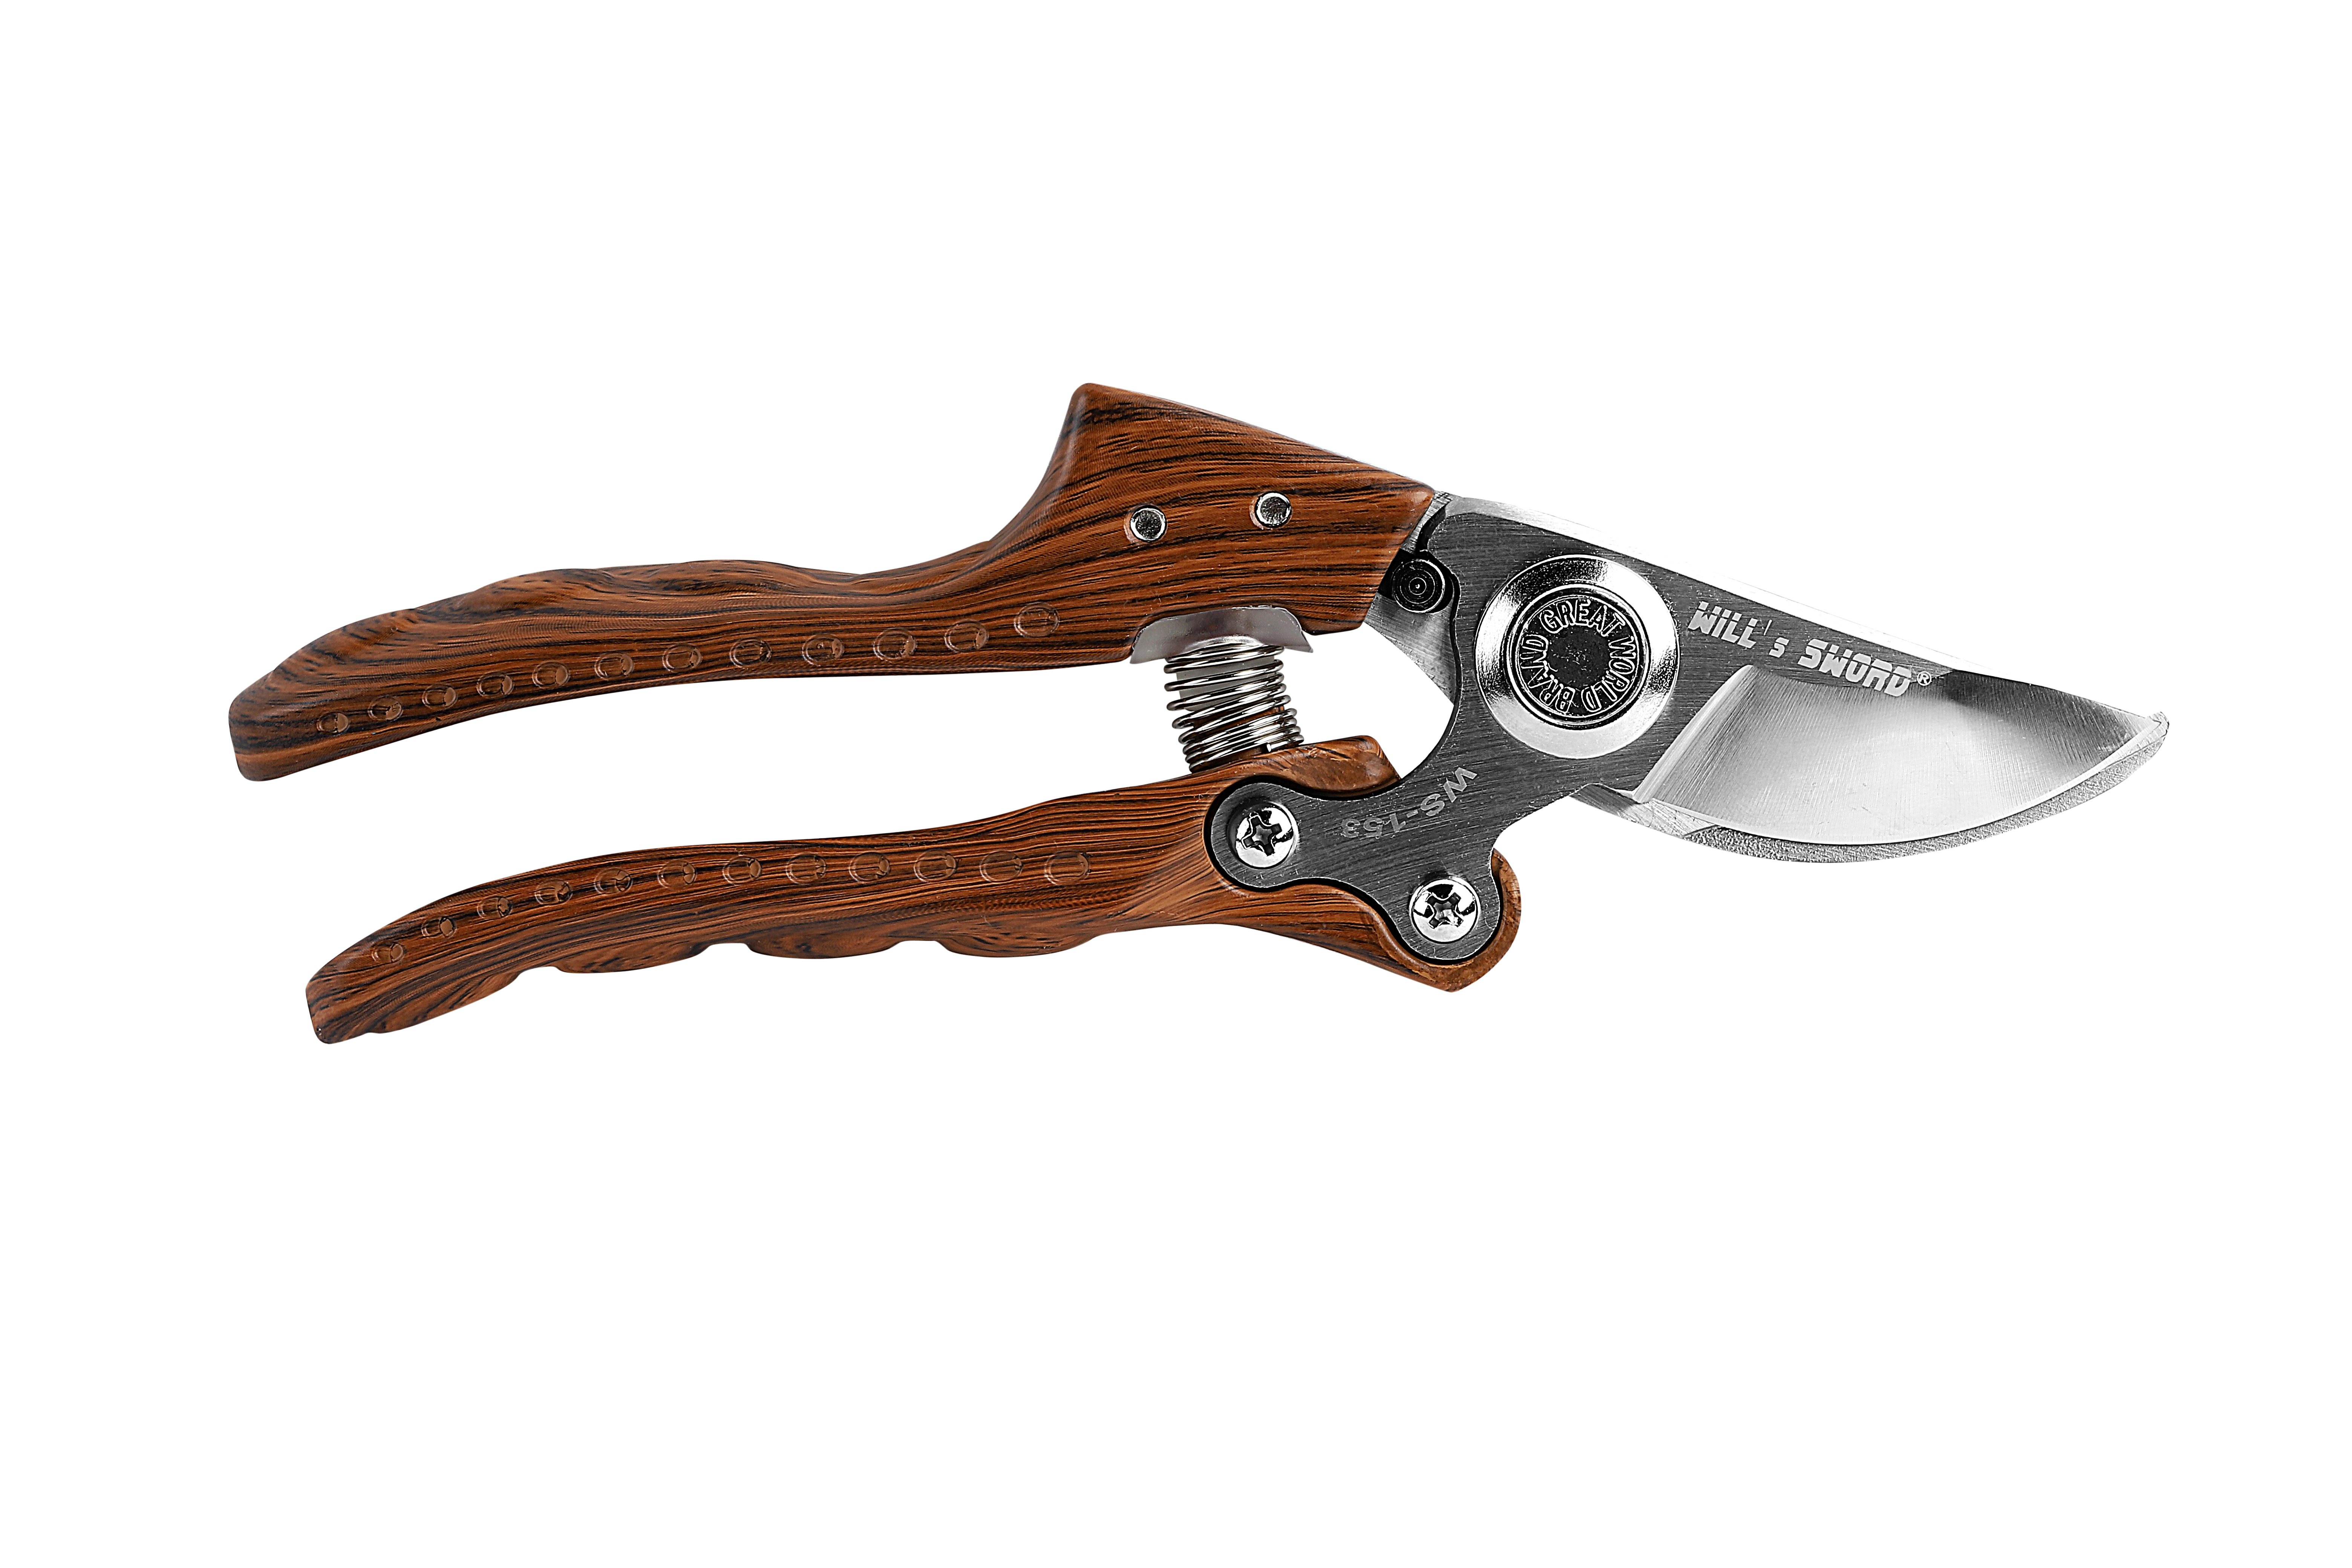 High quality wooden handle pruner shears